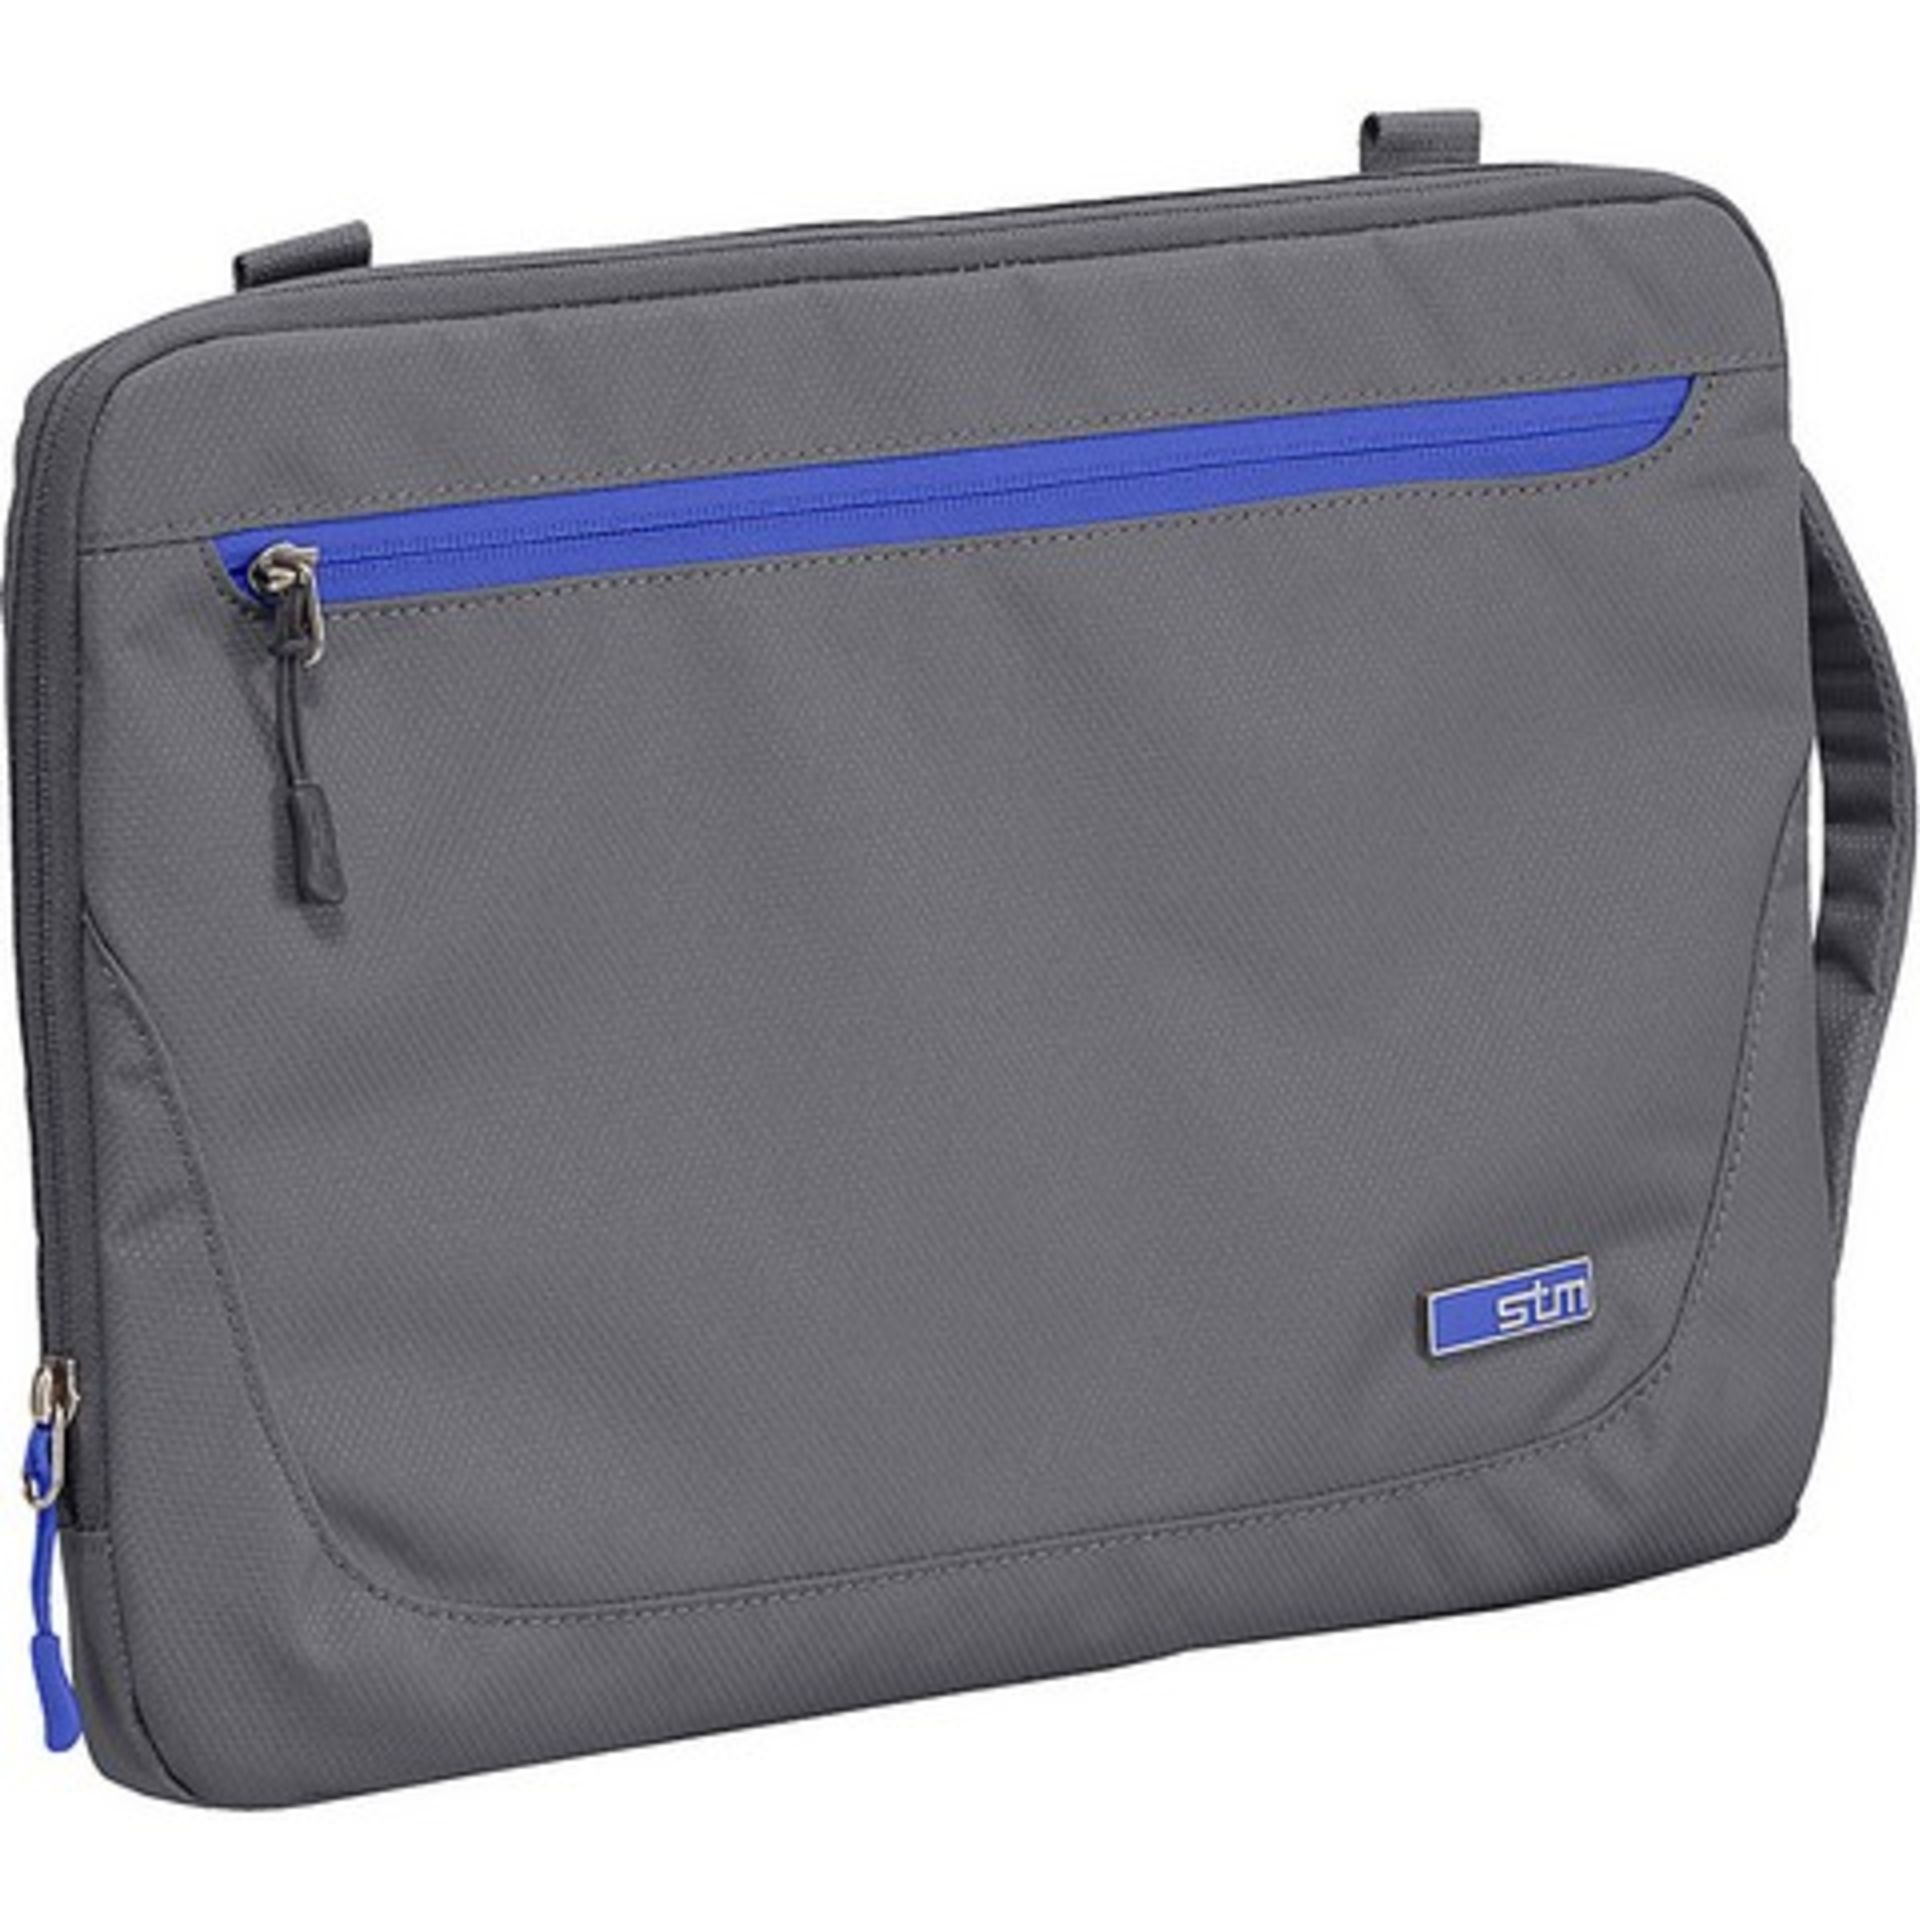 + VAT Brand New STM Blazer Padded Sleeve Bag For Laptops And Tablets 11" Charcoal With Removable